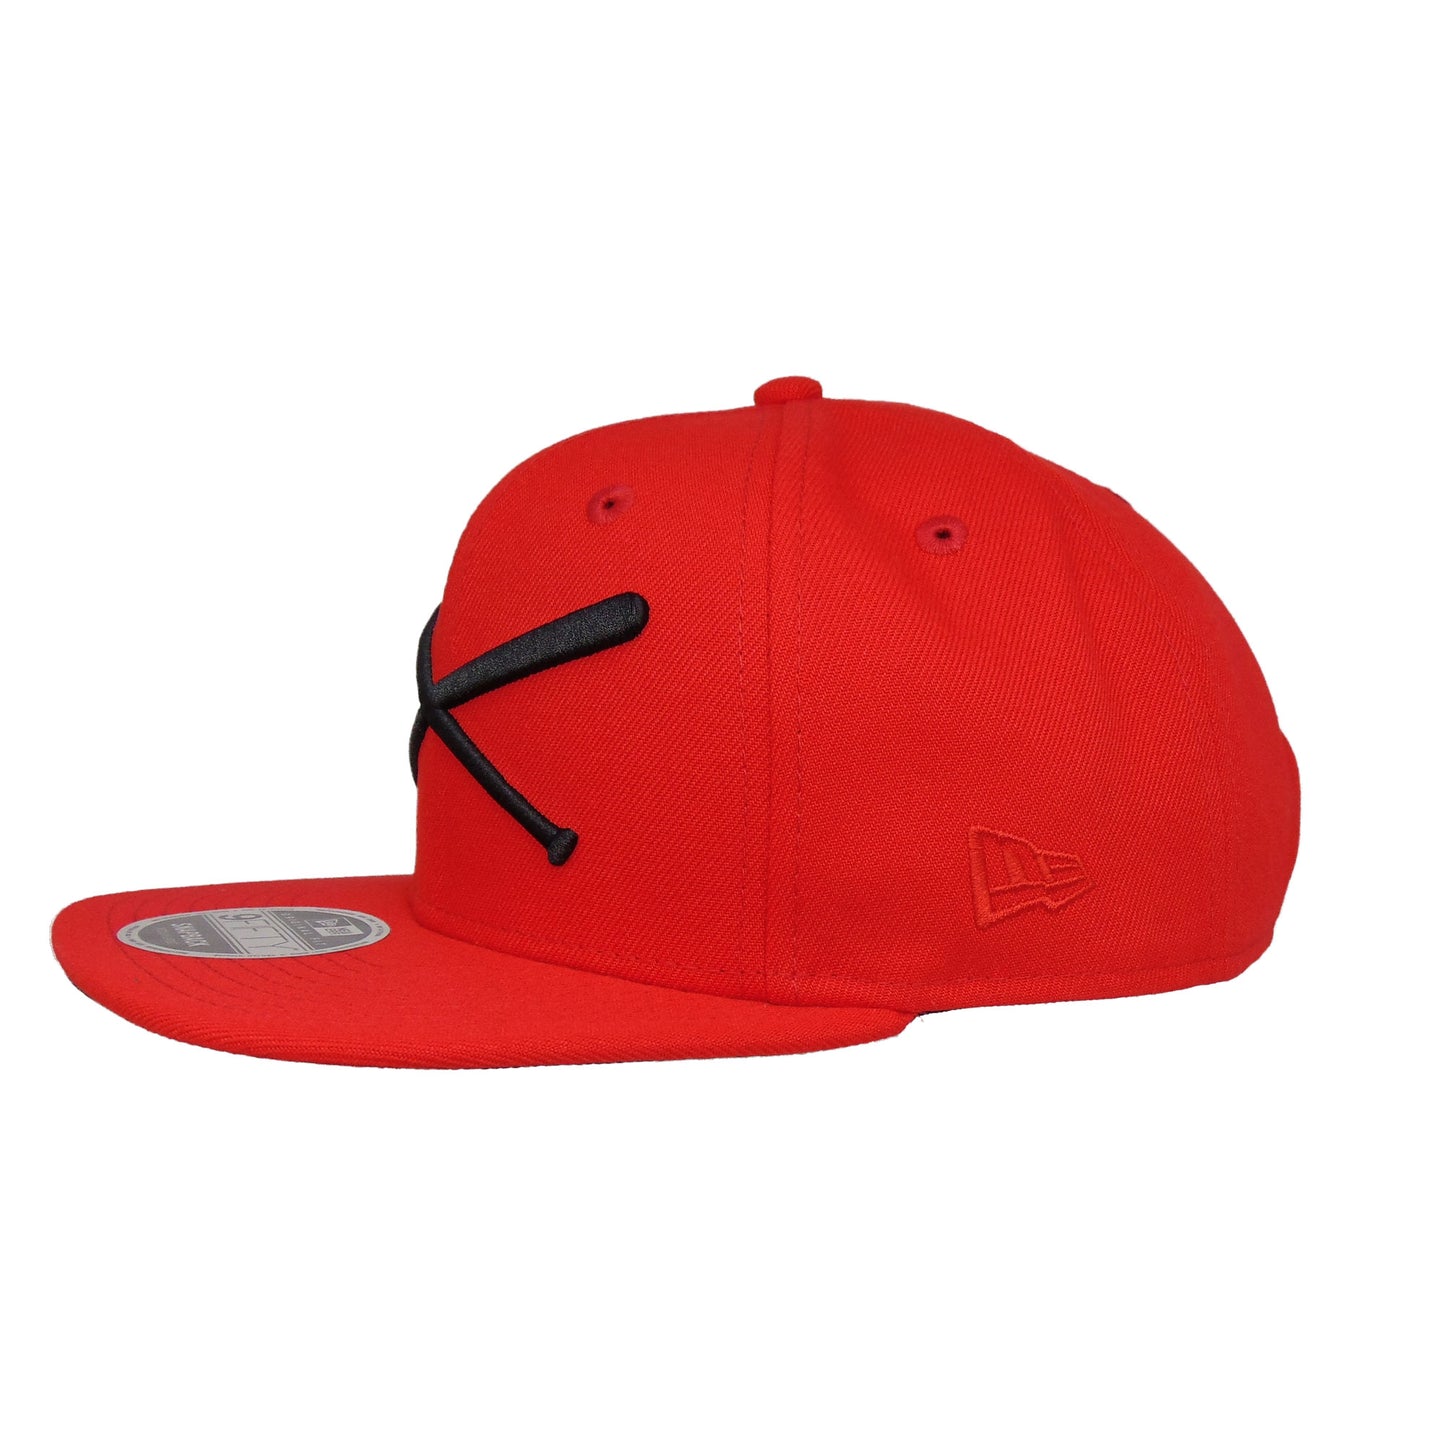 Justfitteds Crossed Bats New Era 9FIFTY Snapback Cap fire red